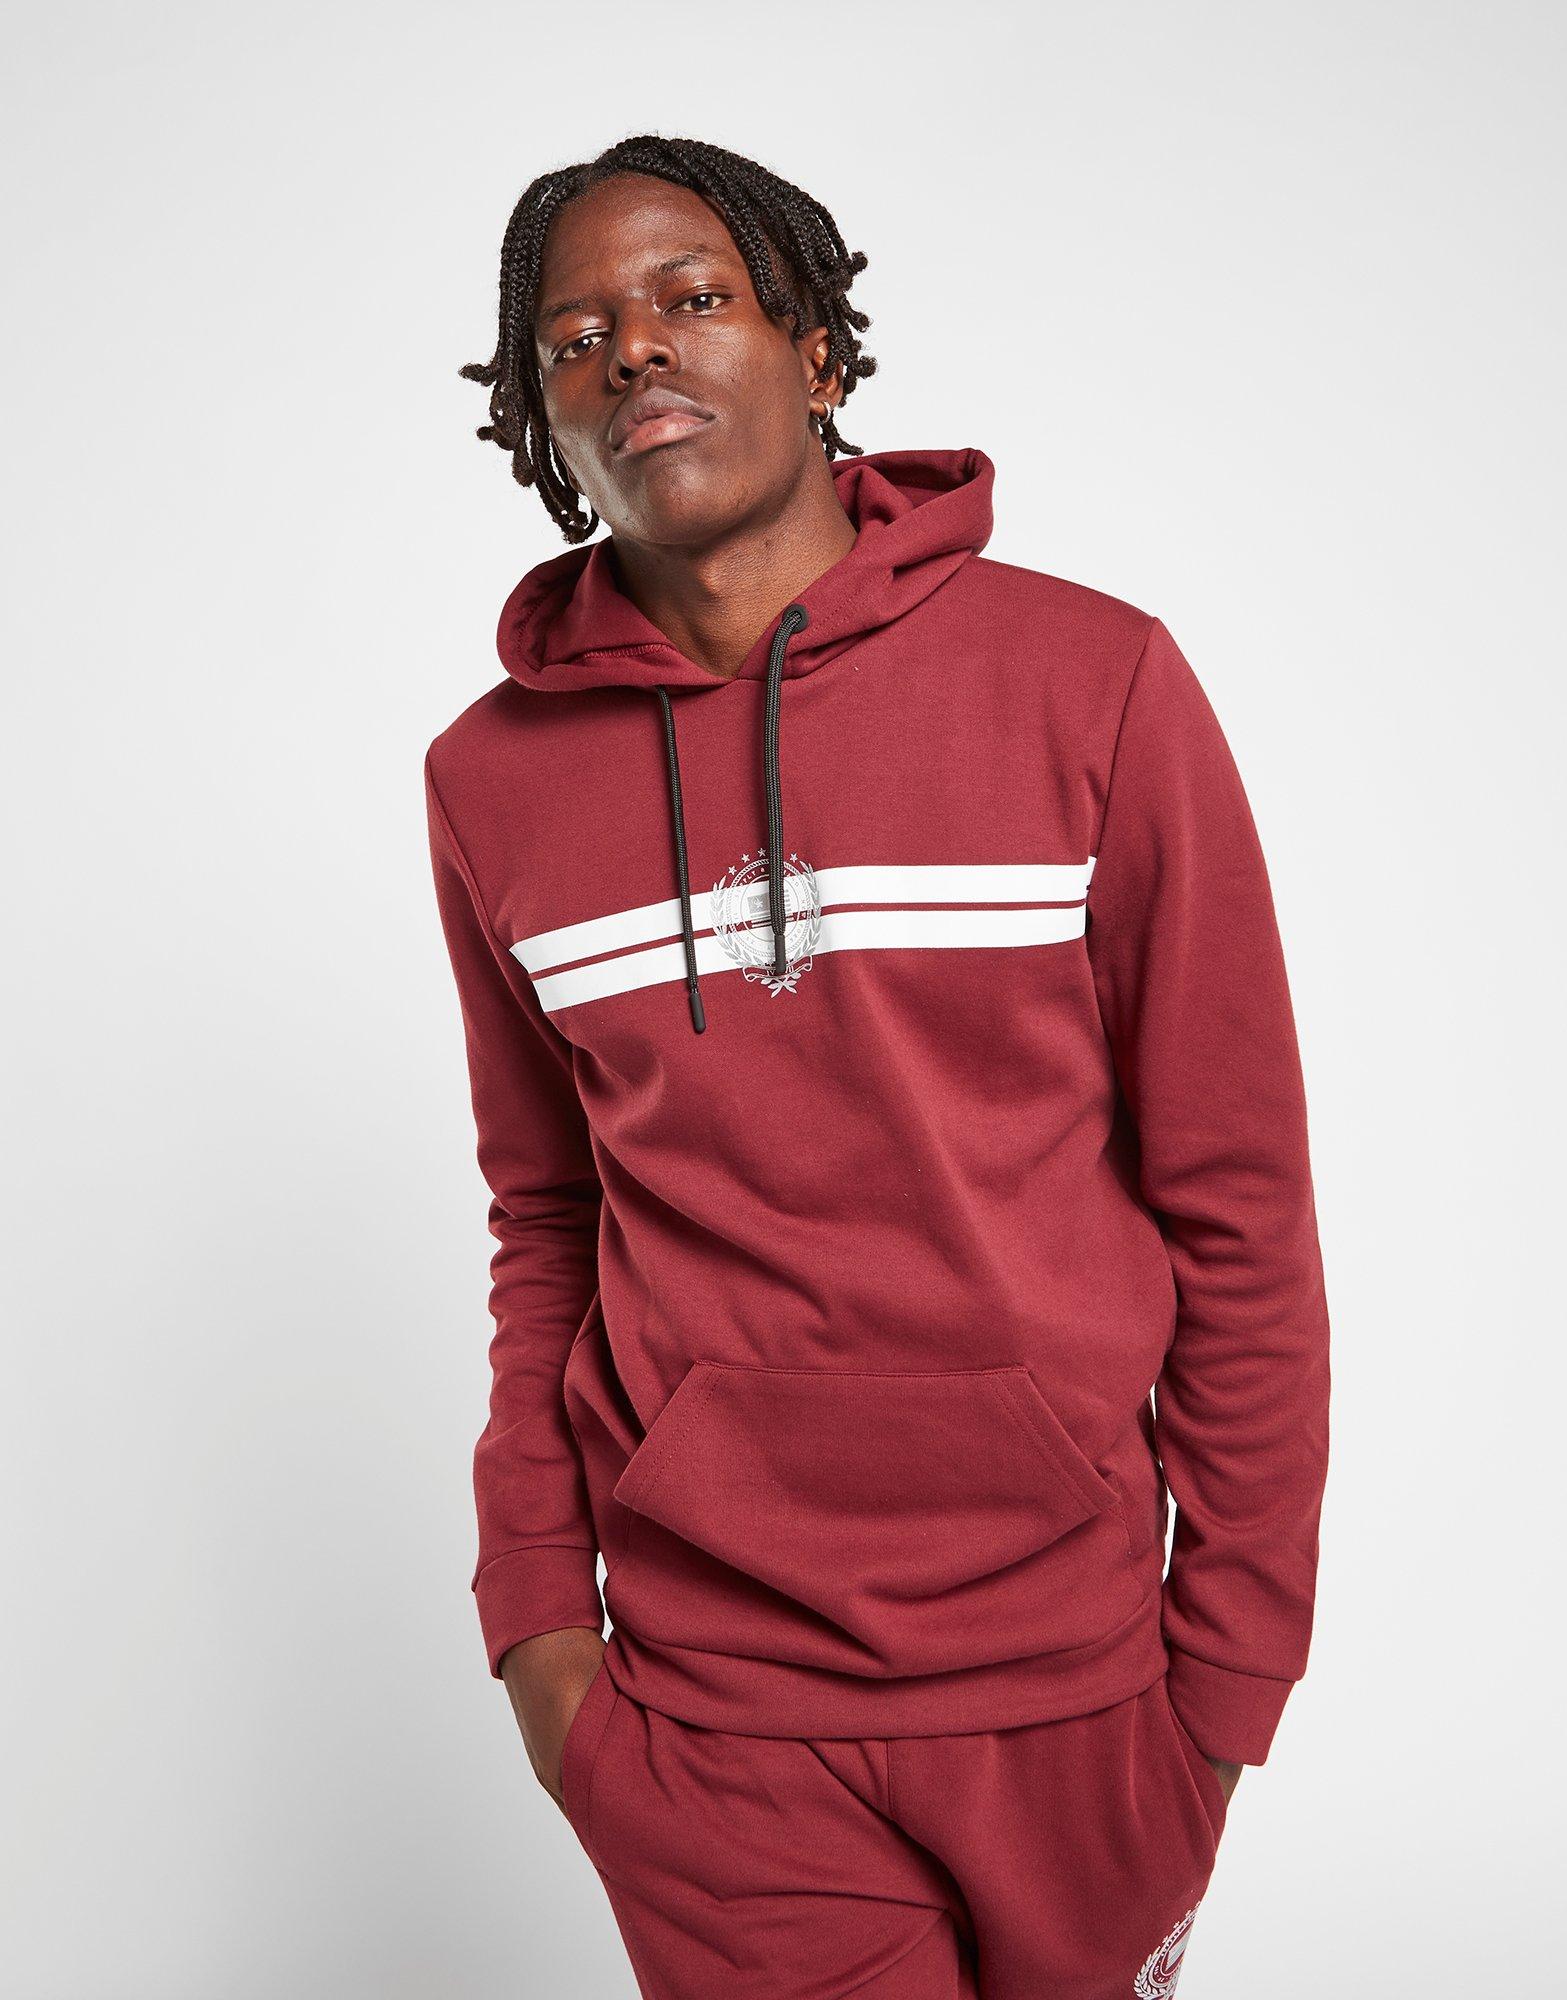 supply and demand red tracksuit